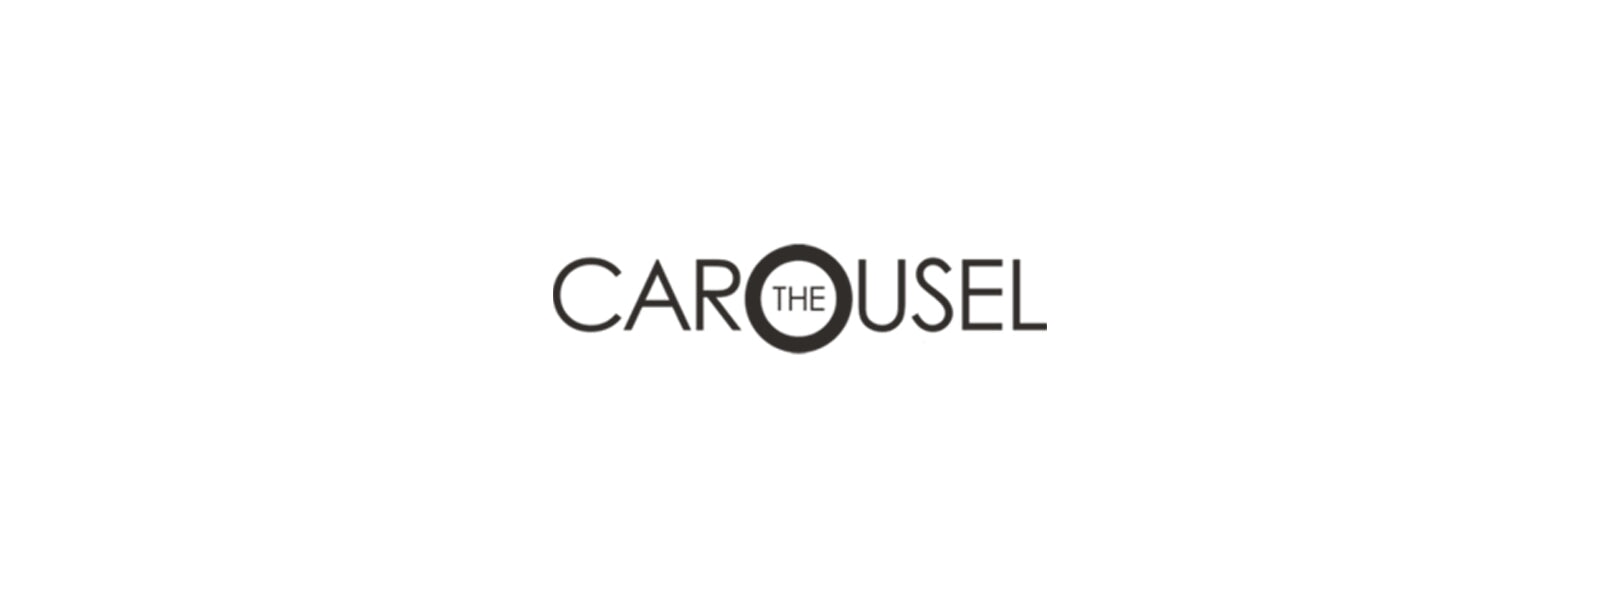 The Carousel — The Beauty Of Business Collaboration When Values Align